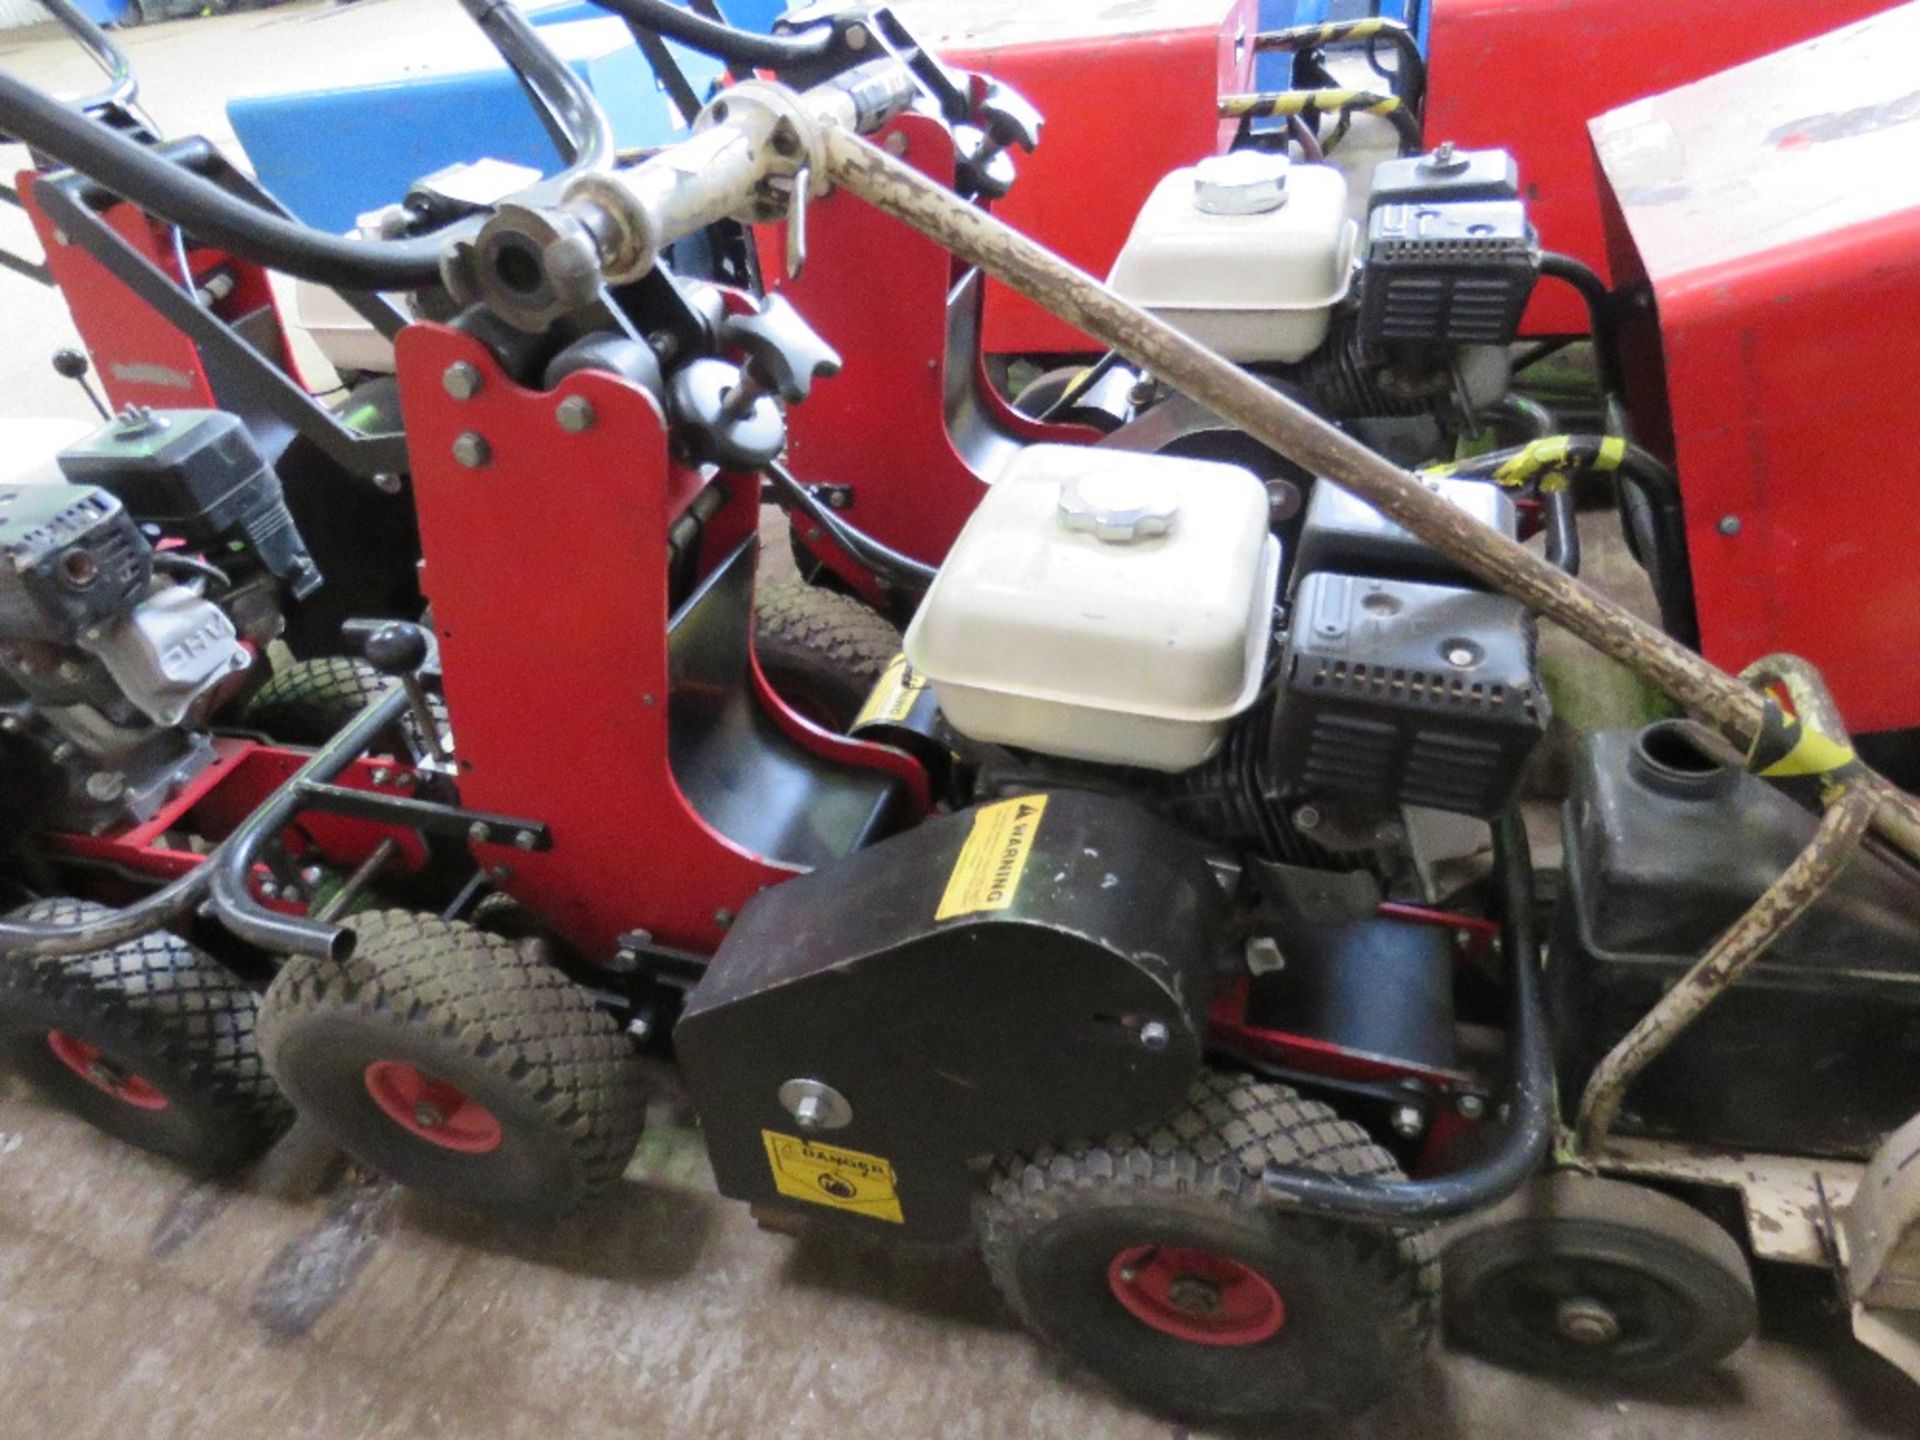 TRACMASTER PETROL ENGINED TURF CUTTER. WHEN TESTED WAS SEEN TO RUN, DRIVE AND BLADE MOVED. DIRECT FR